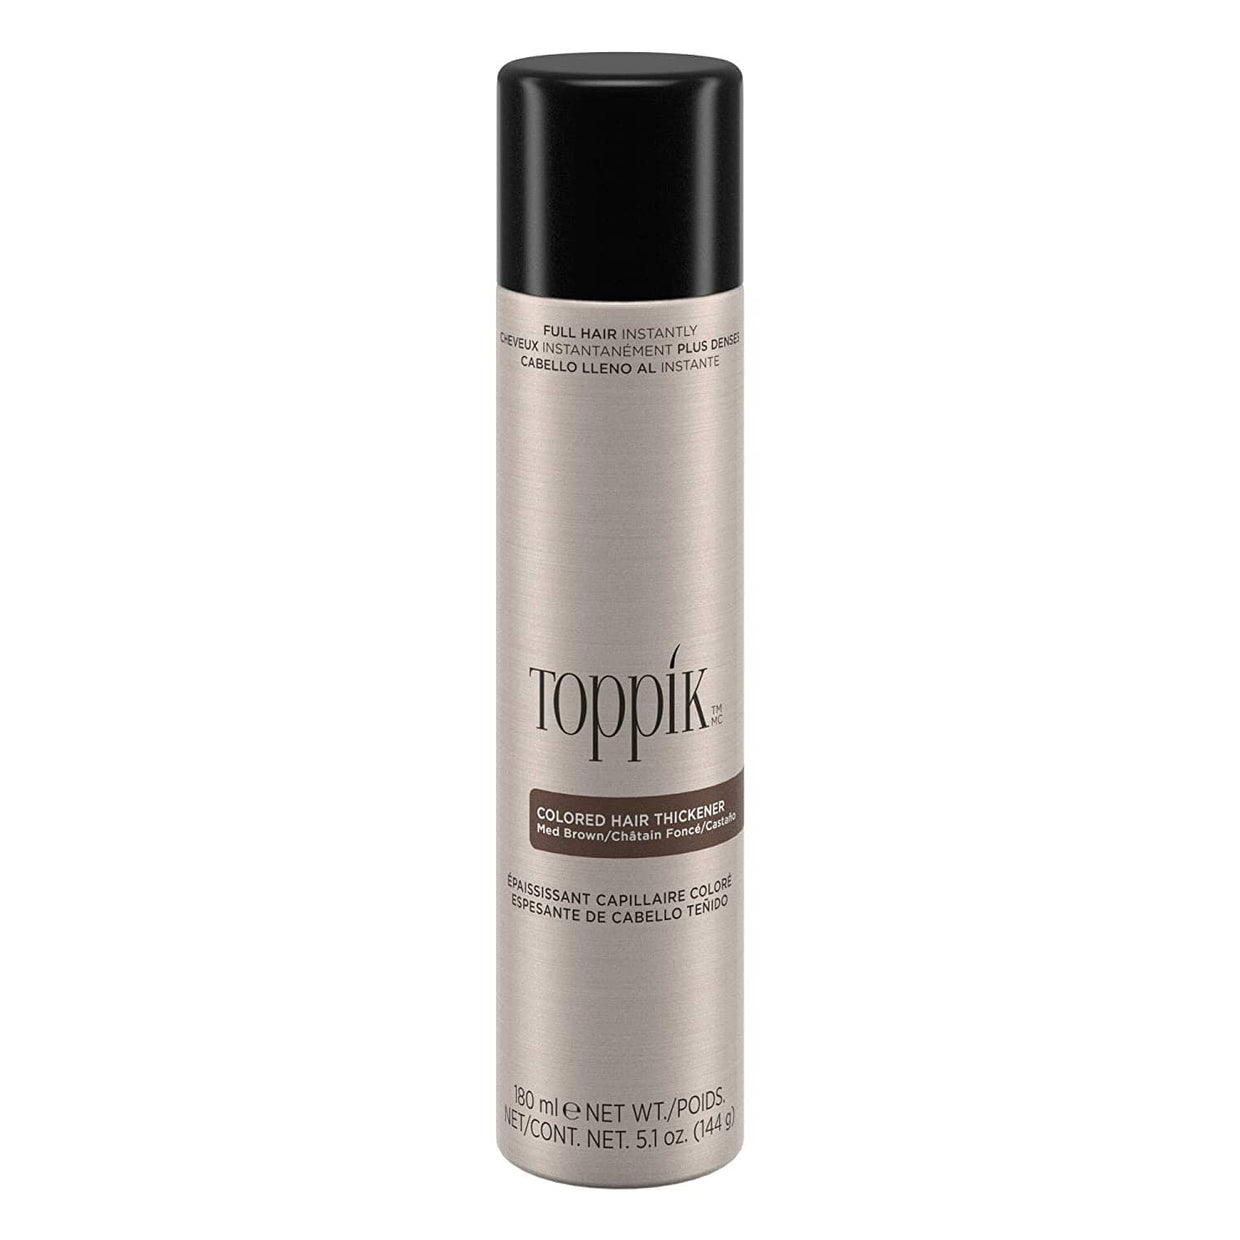 Toppik Colored Hair Thickener - MEDIUM BROWN Toppik 5.1 oz/144g bottle Shop at Exclusive Beauty Club